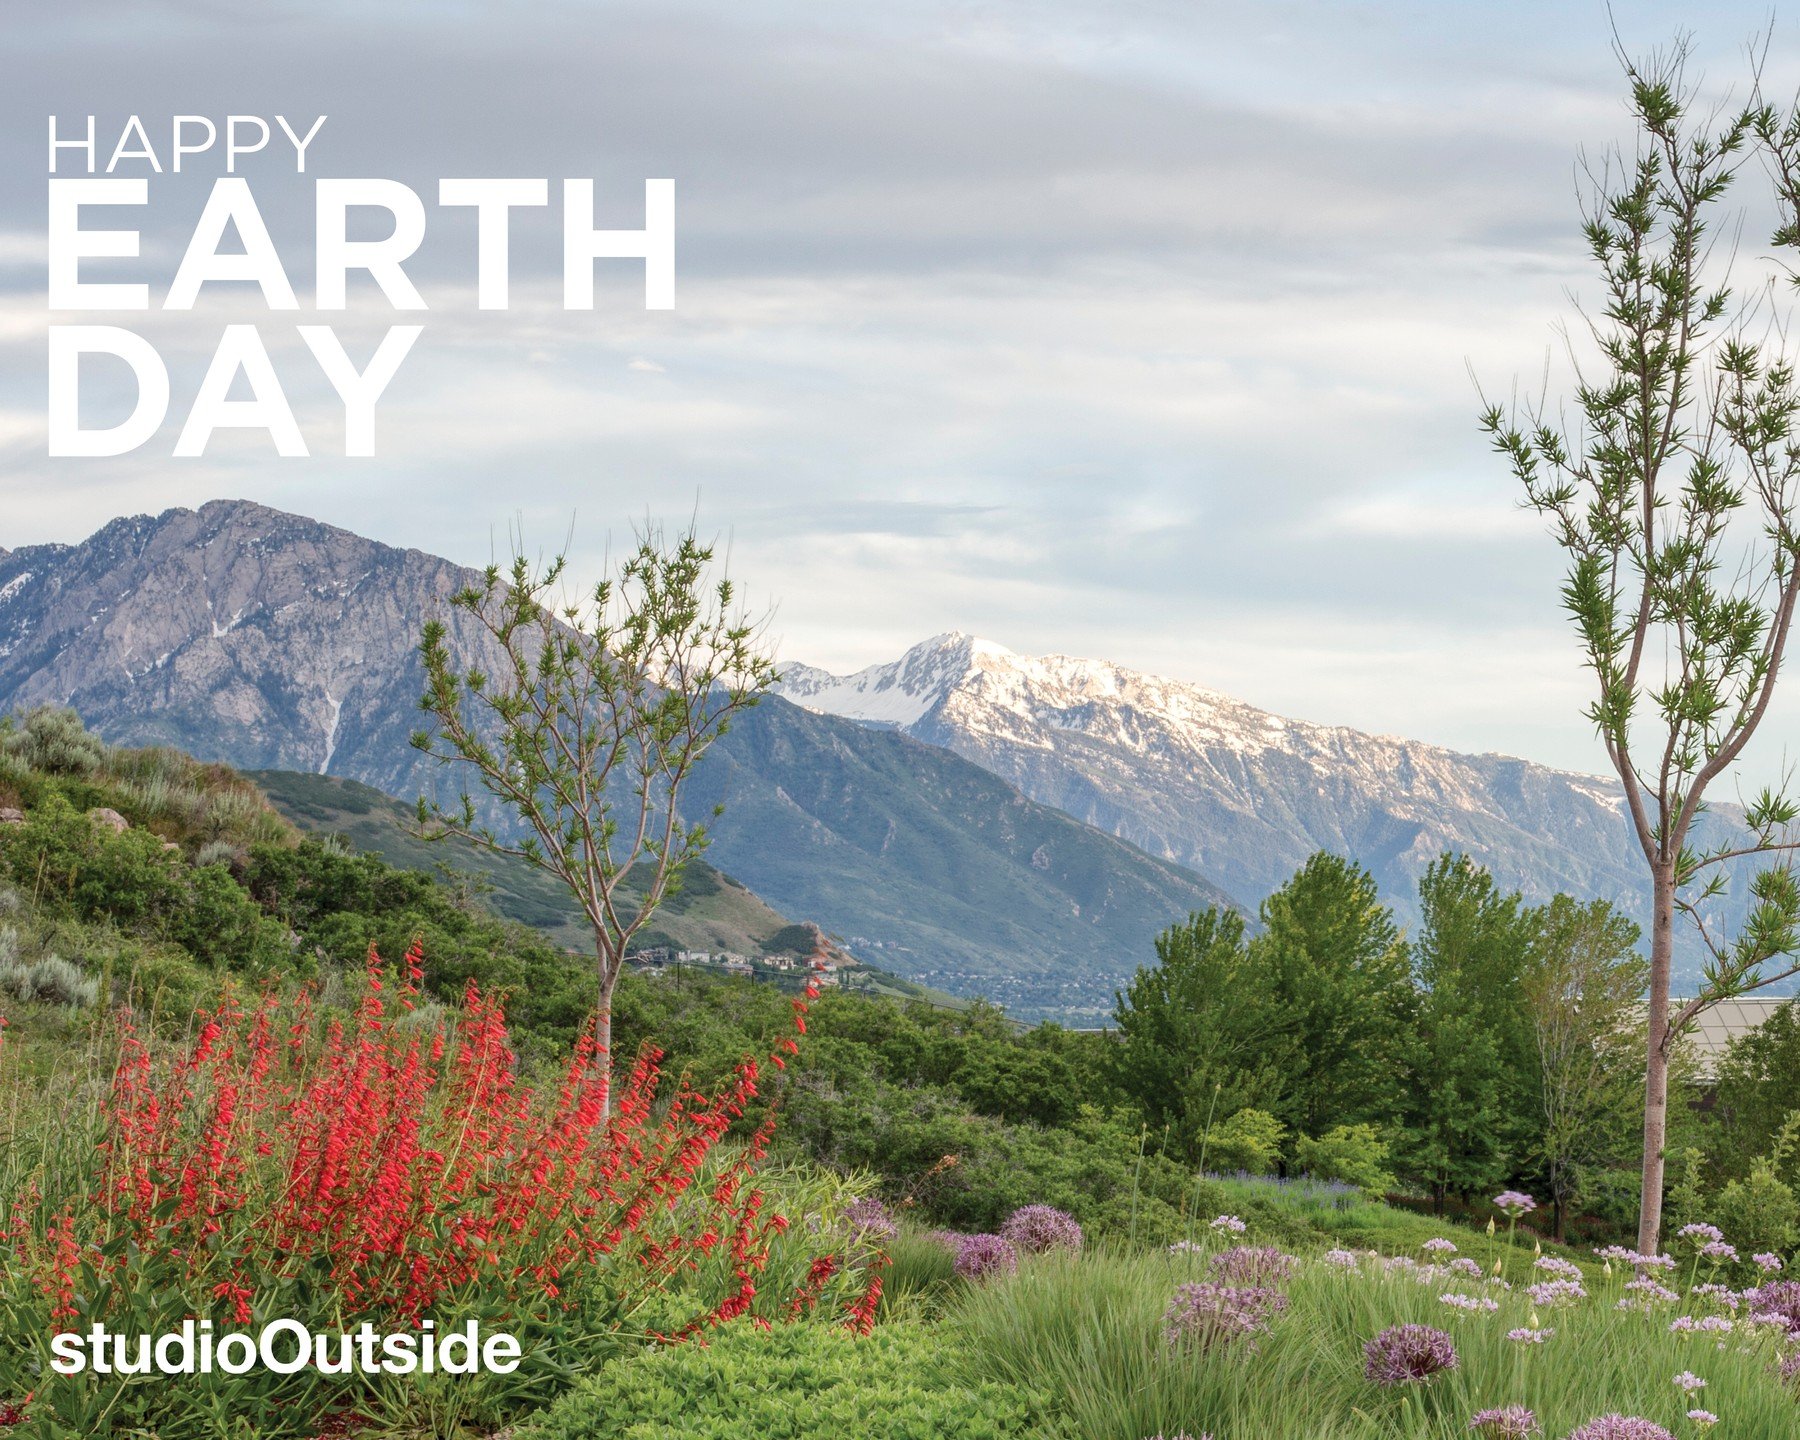 As landscape architects, we encourage exploring the world around us, teaching on the benefits and opportunities our planet provides, and promoting the stewardship and sustainability of earth&rsquo;s natural resources for our future generations. 
From